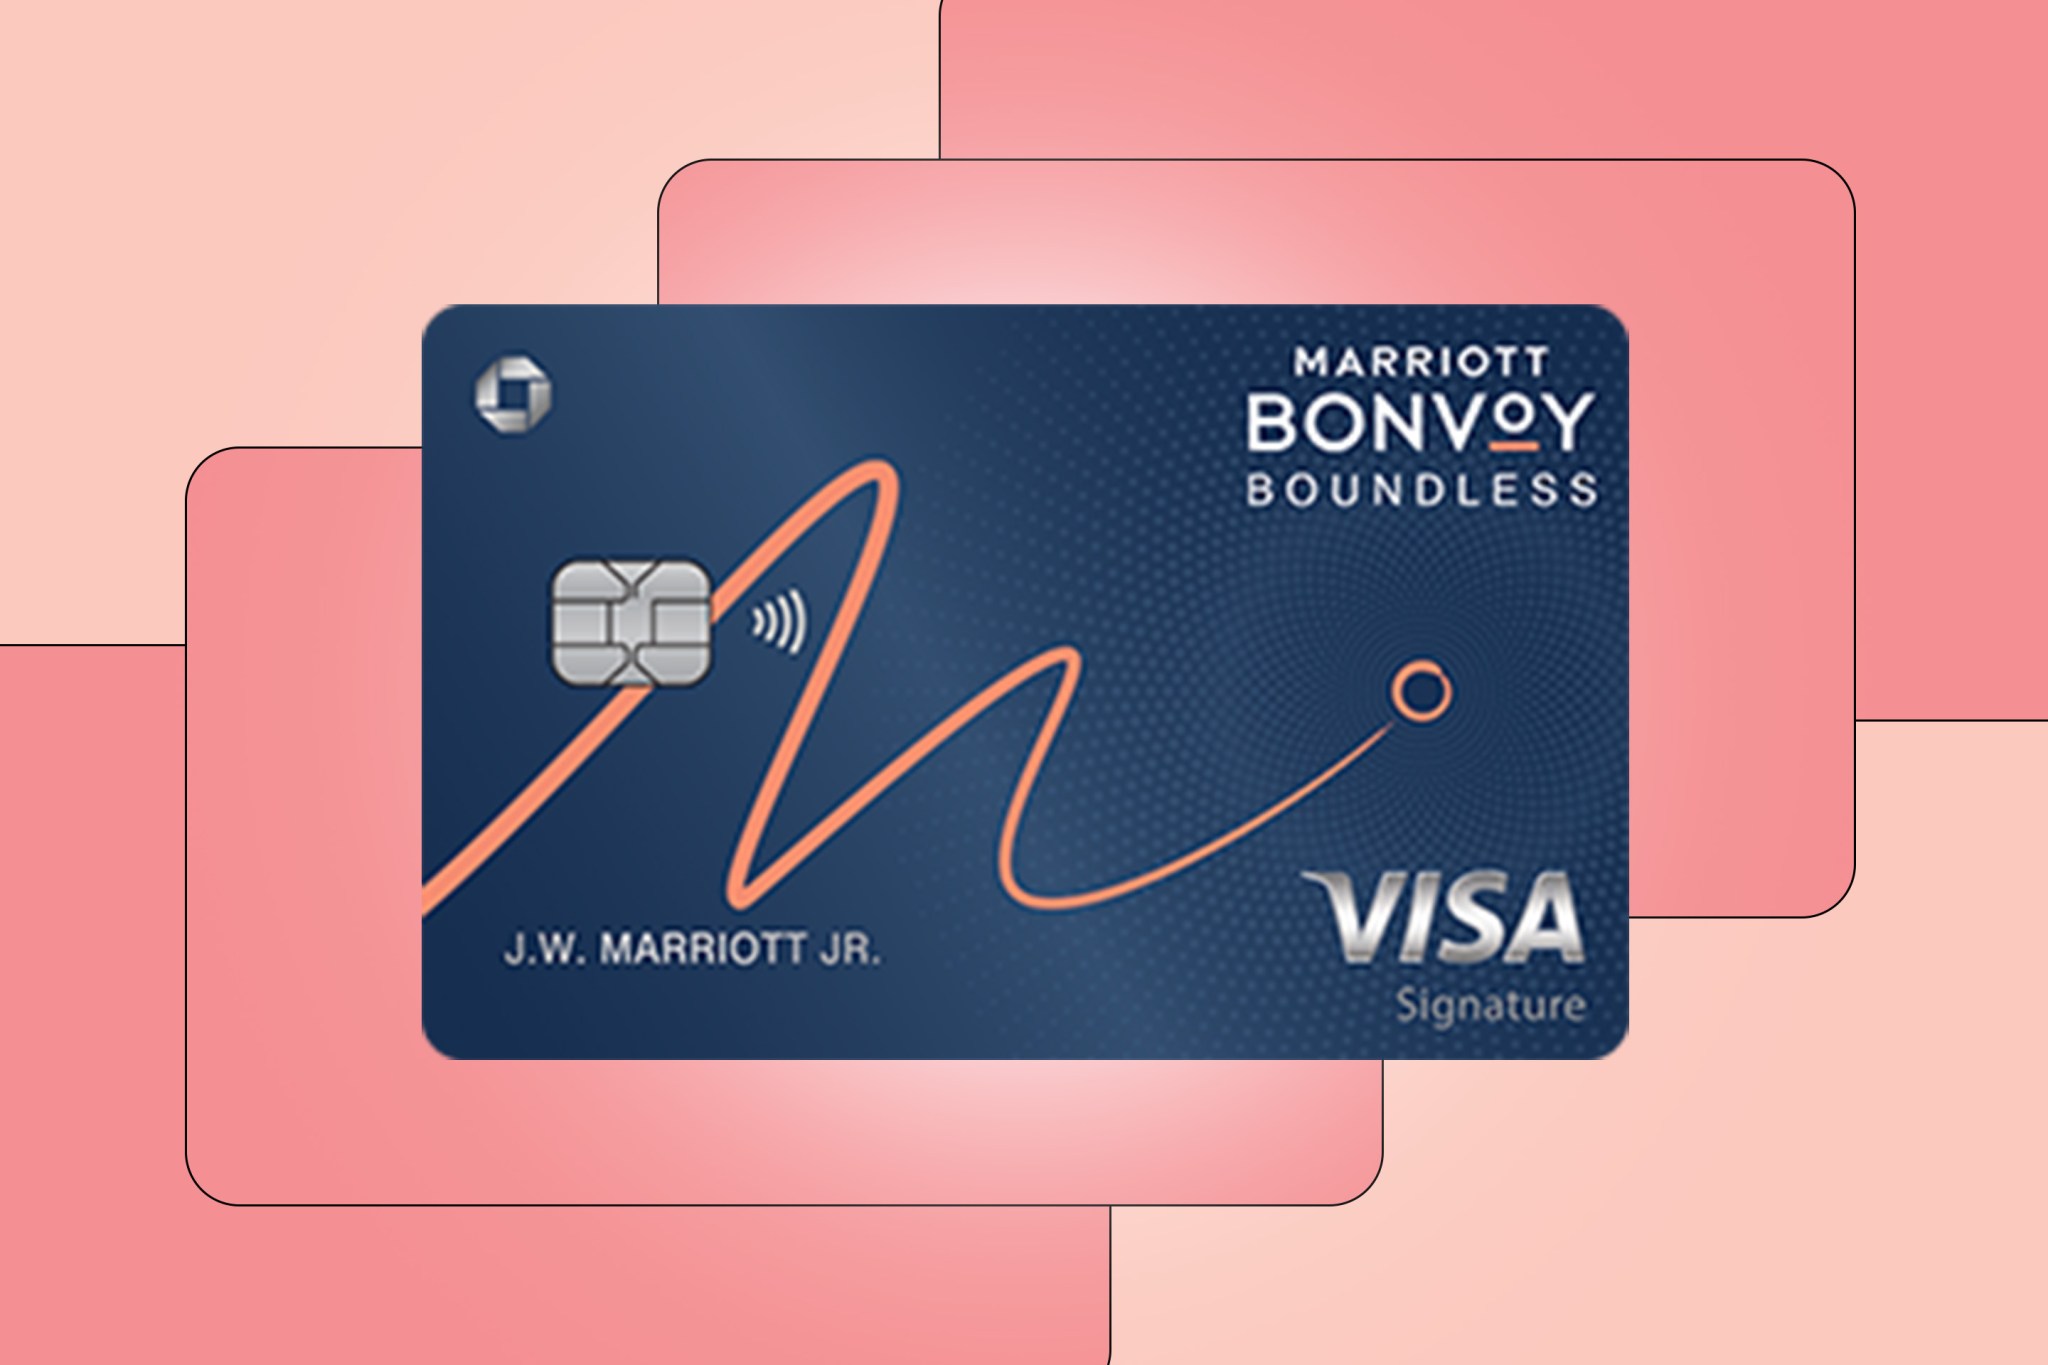 Marriott Bonvoy Boundless credit card: Worth having for the annual free night award